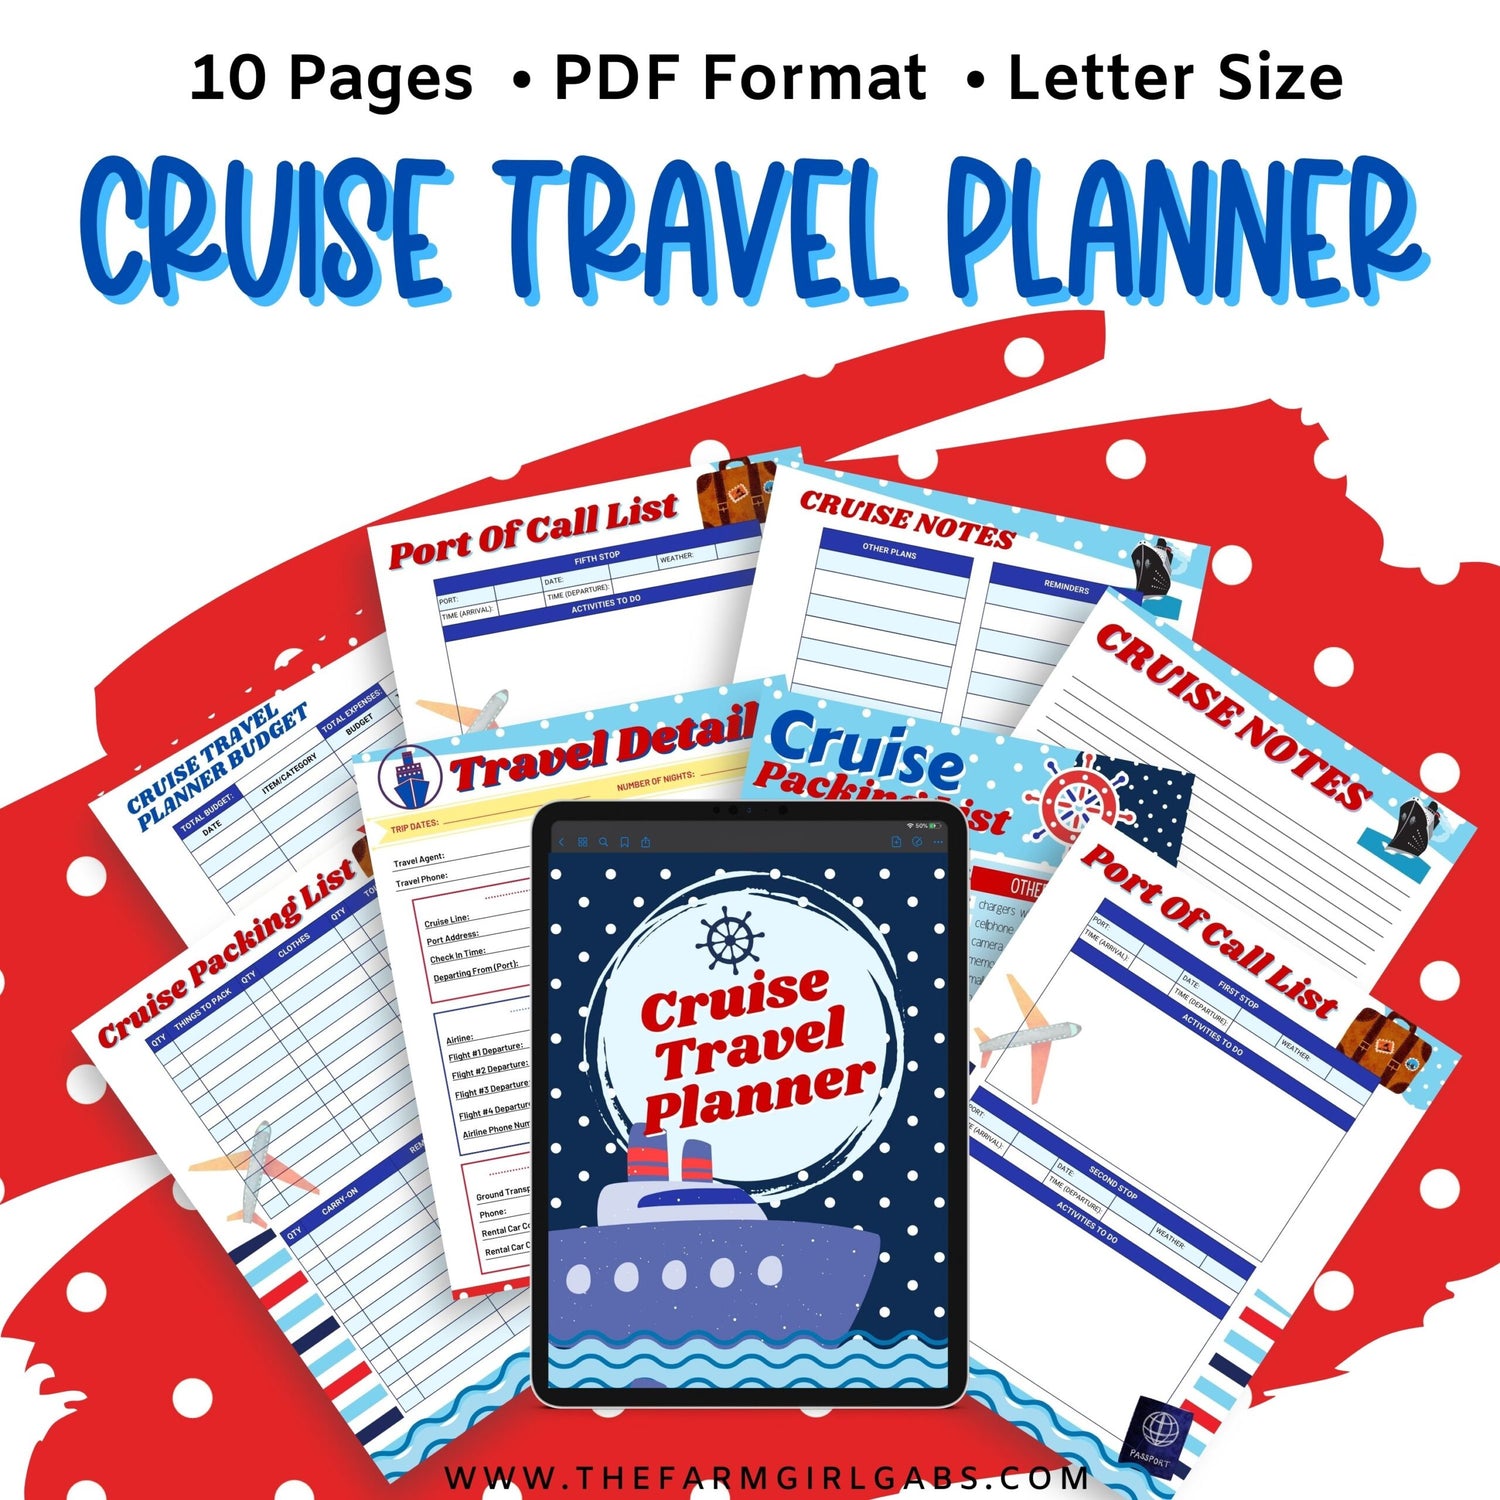 Ready to set sail on a cruise vacation? This printable cruise planner has everything you need to plan your cruise - from budgeting to packing to planning your port of call excursions, can be found in this Printable Cruise Planner